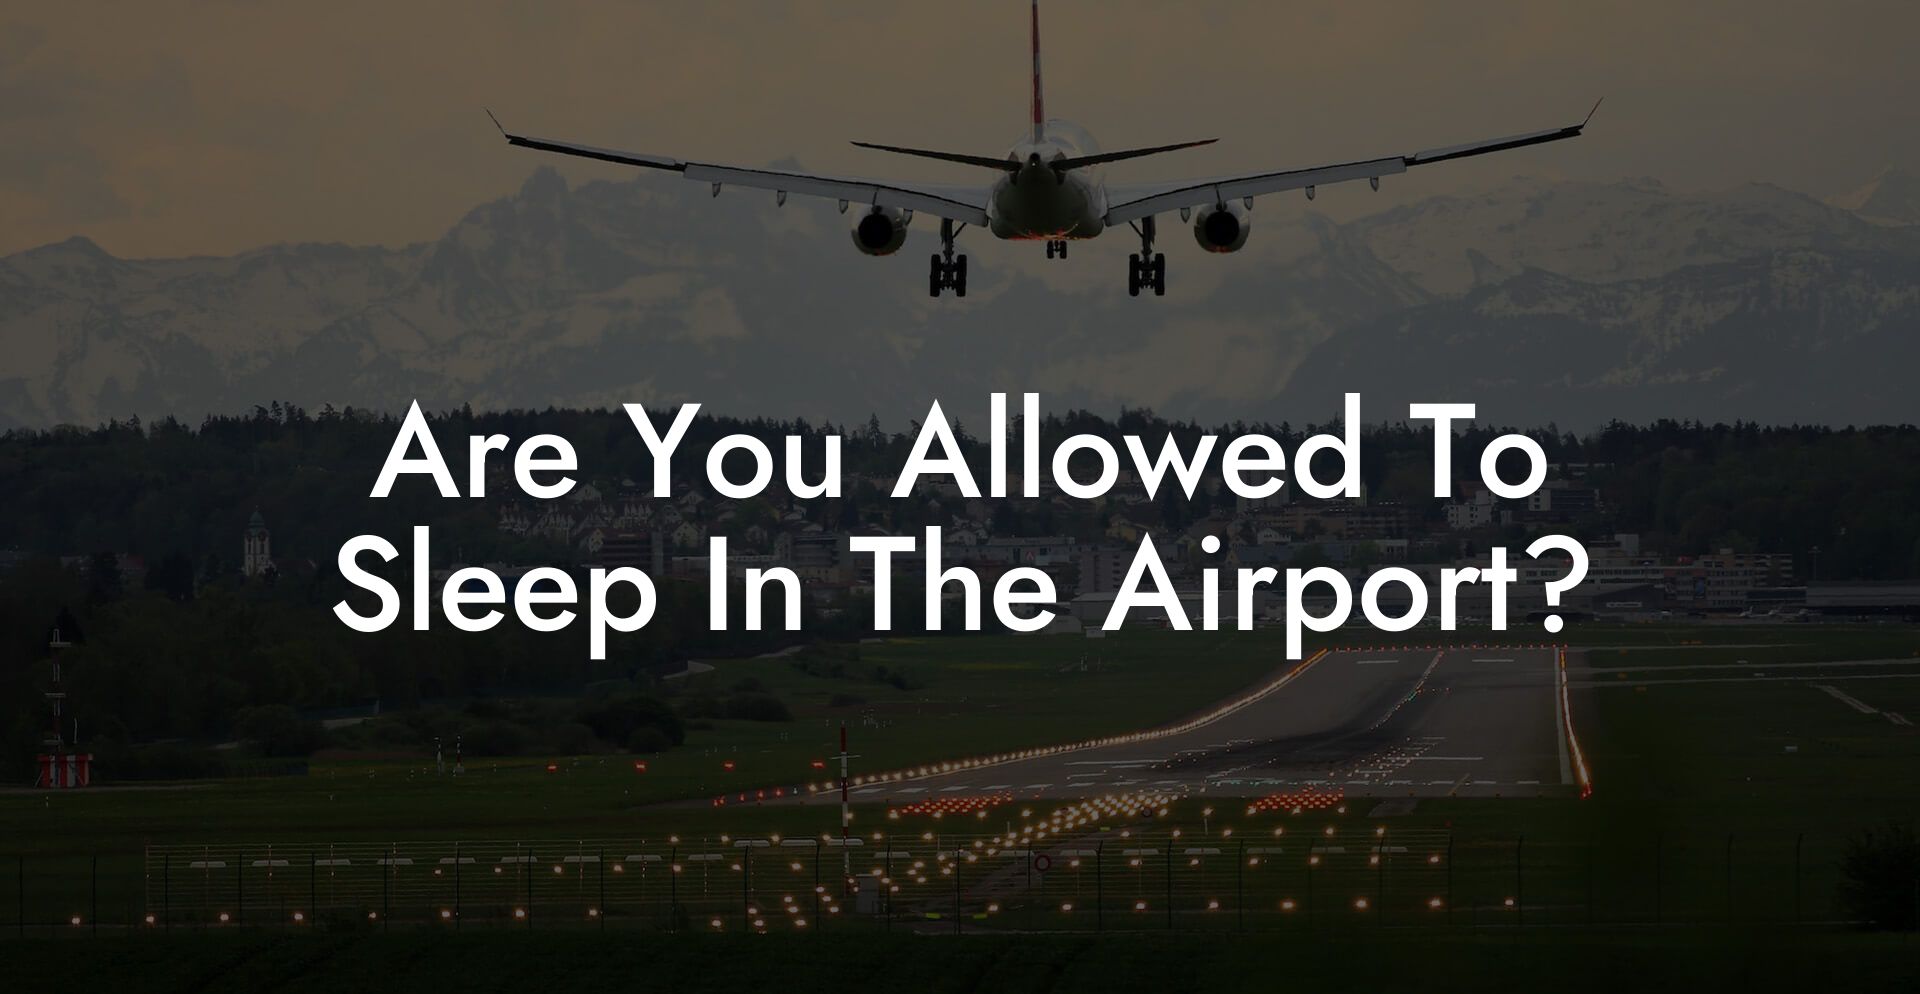 Are You Allowed To Sleep In The Airport?